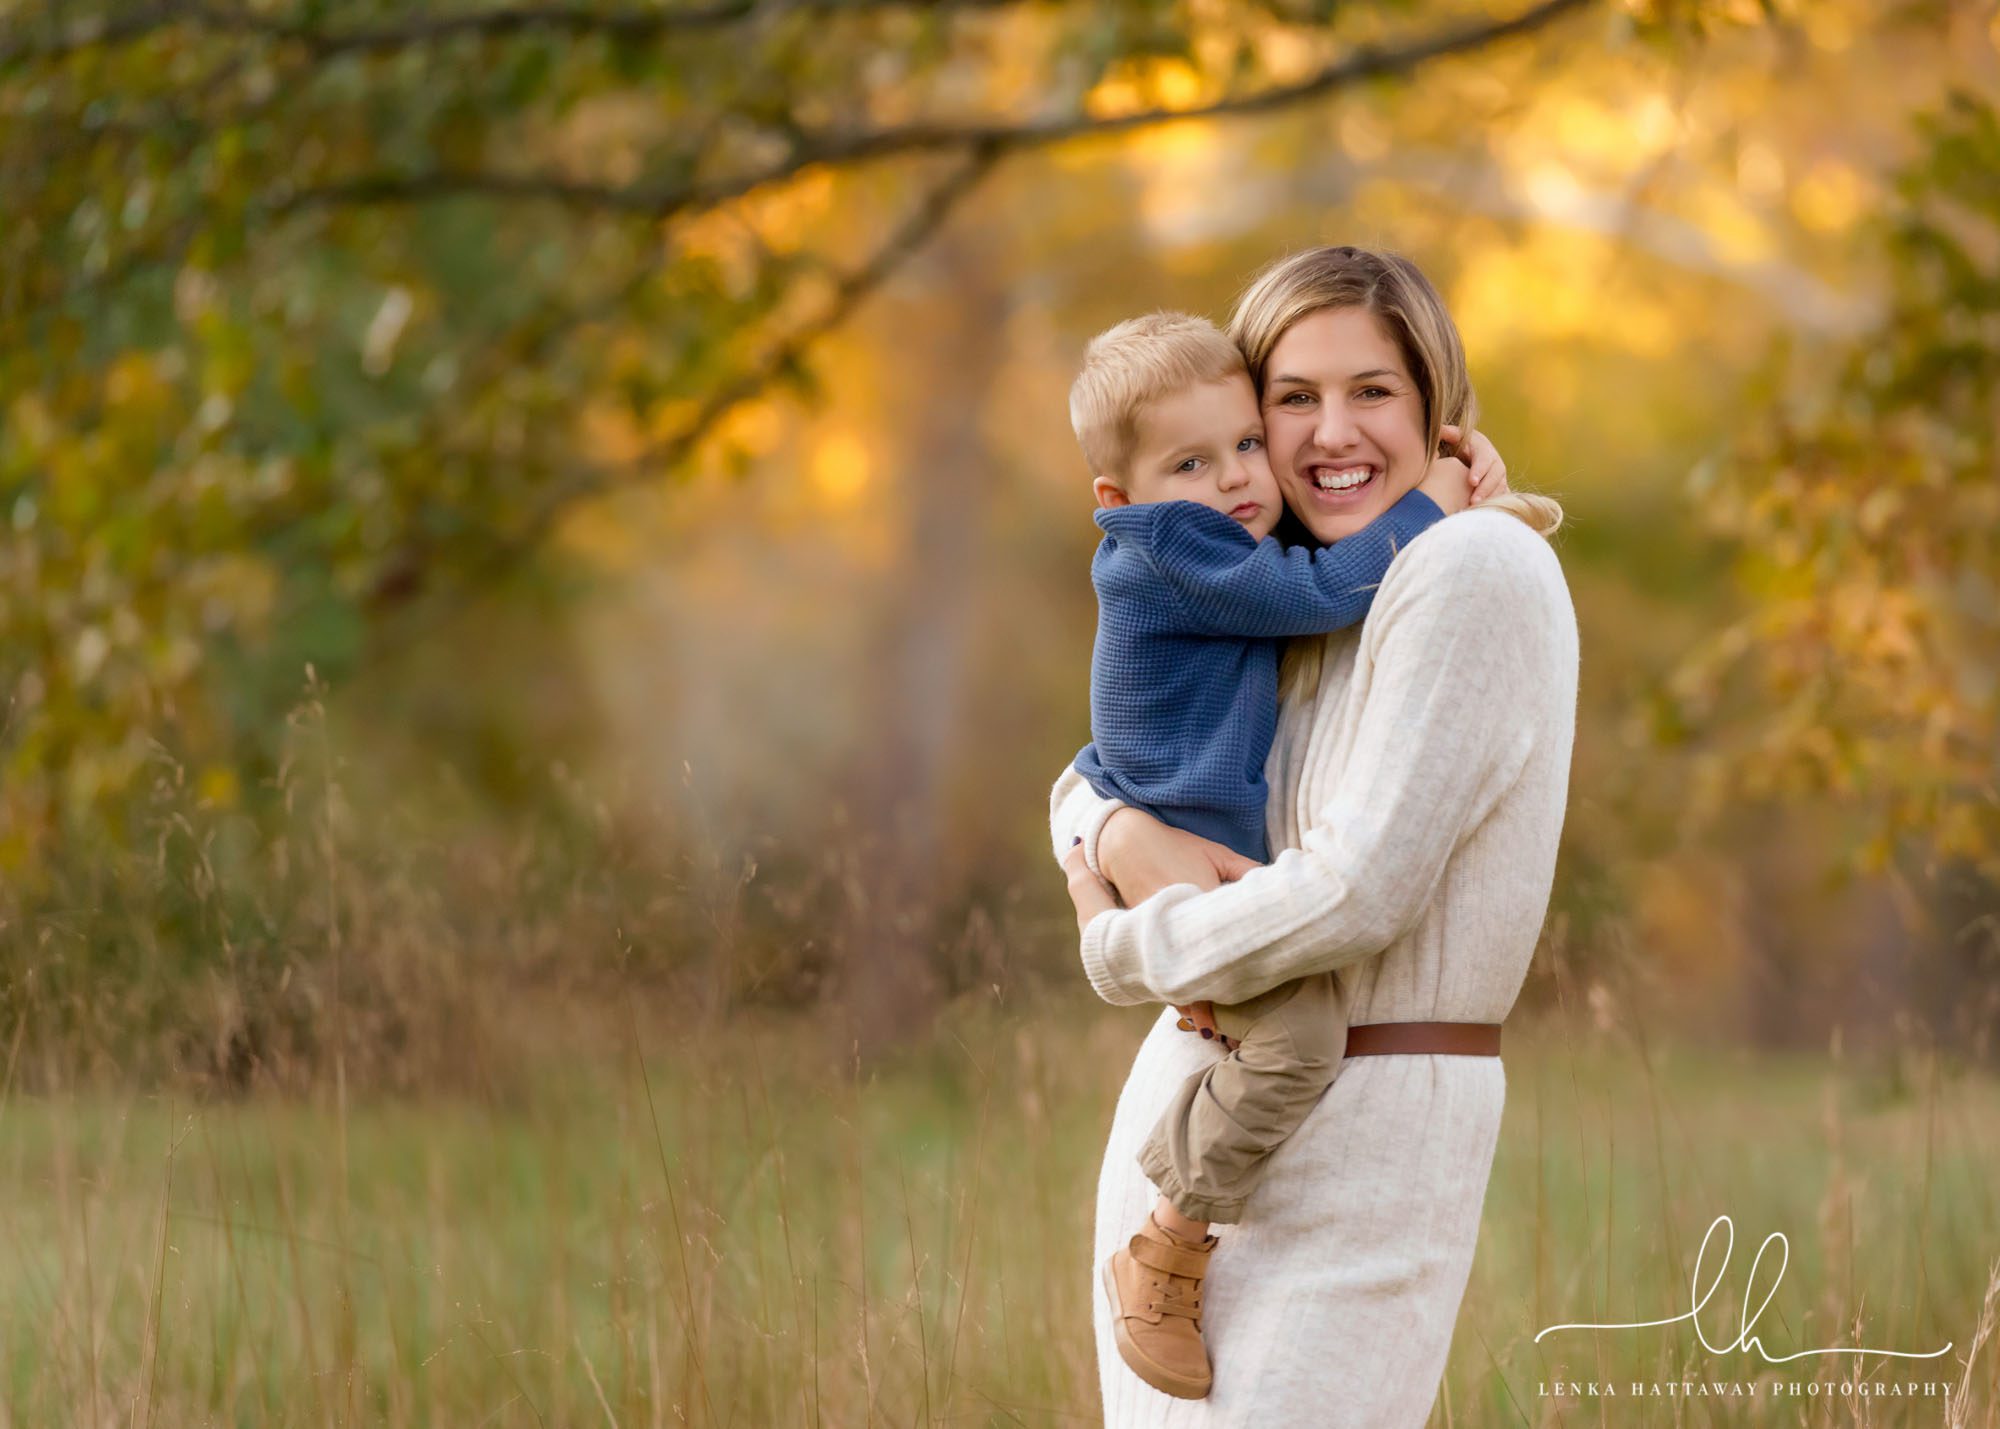 Mom and son hugging together during an outdoor family photo session.